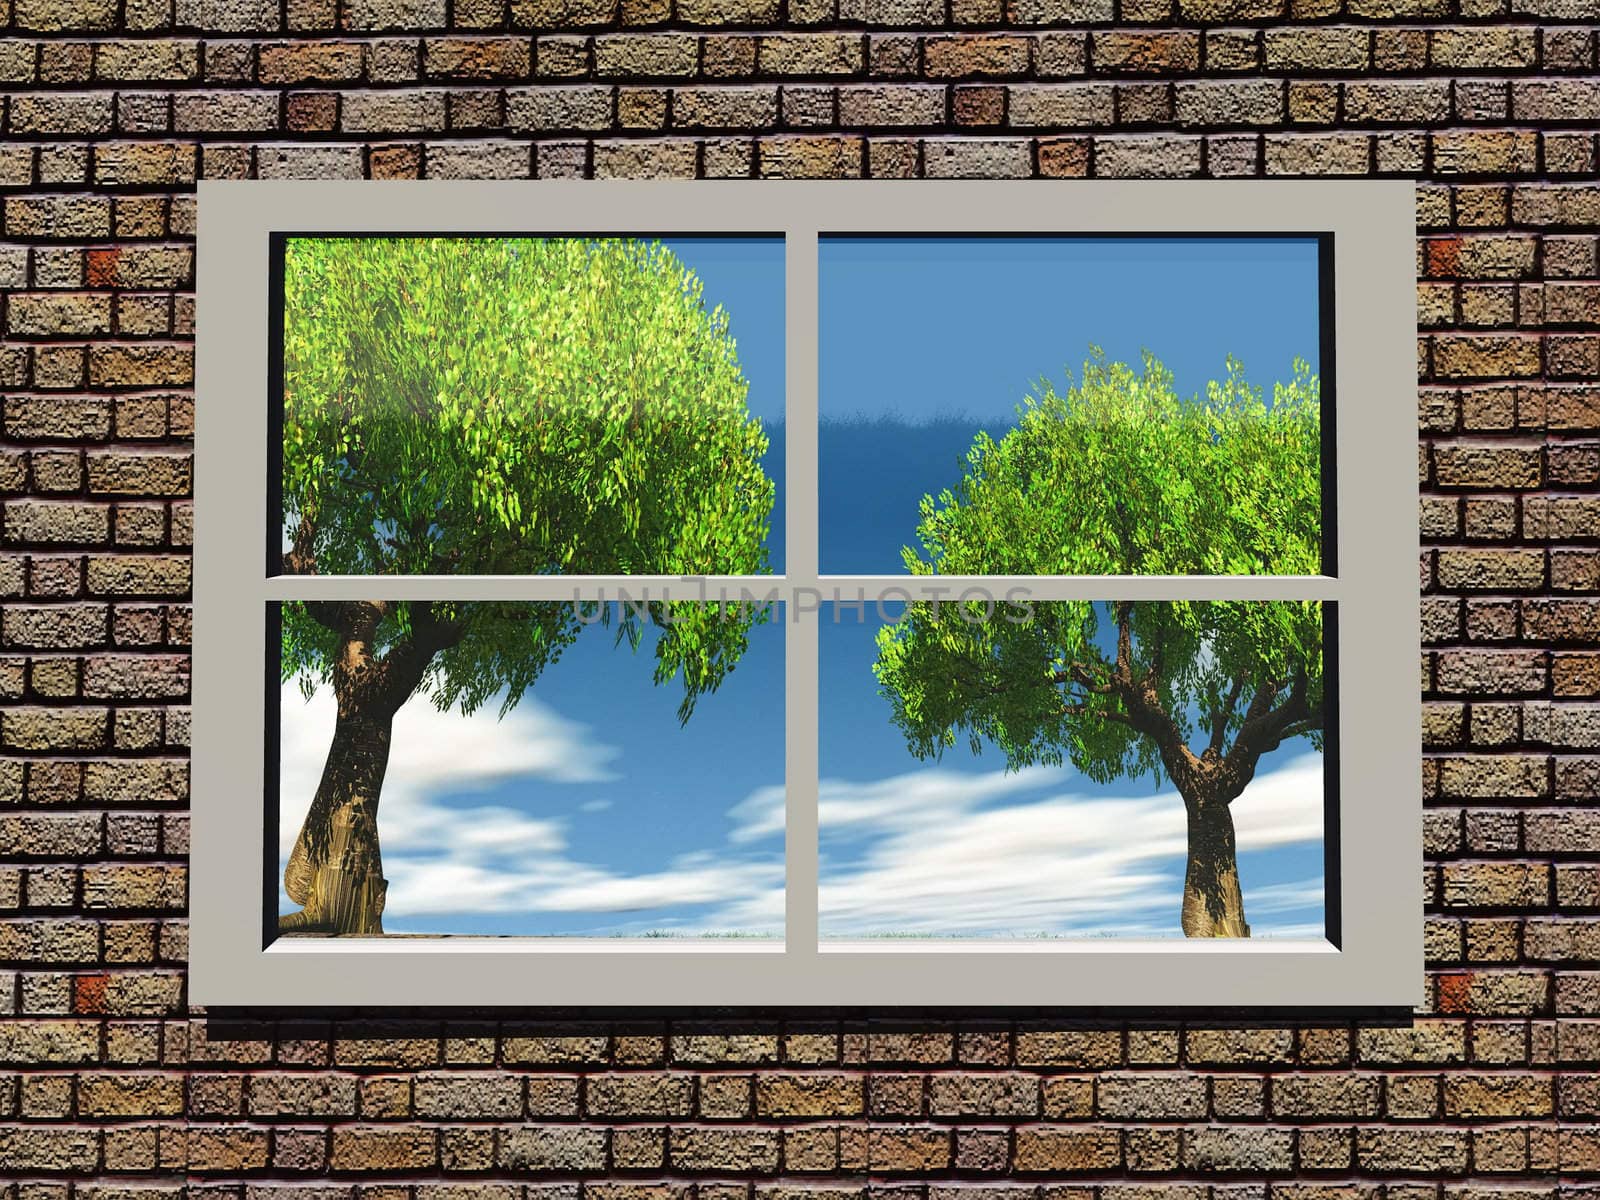 trees and nature through the window